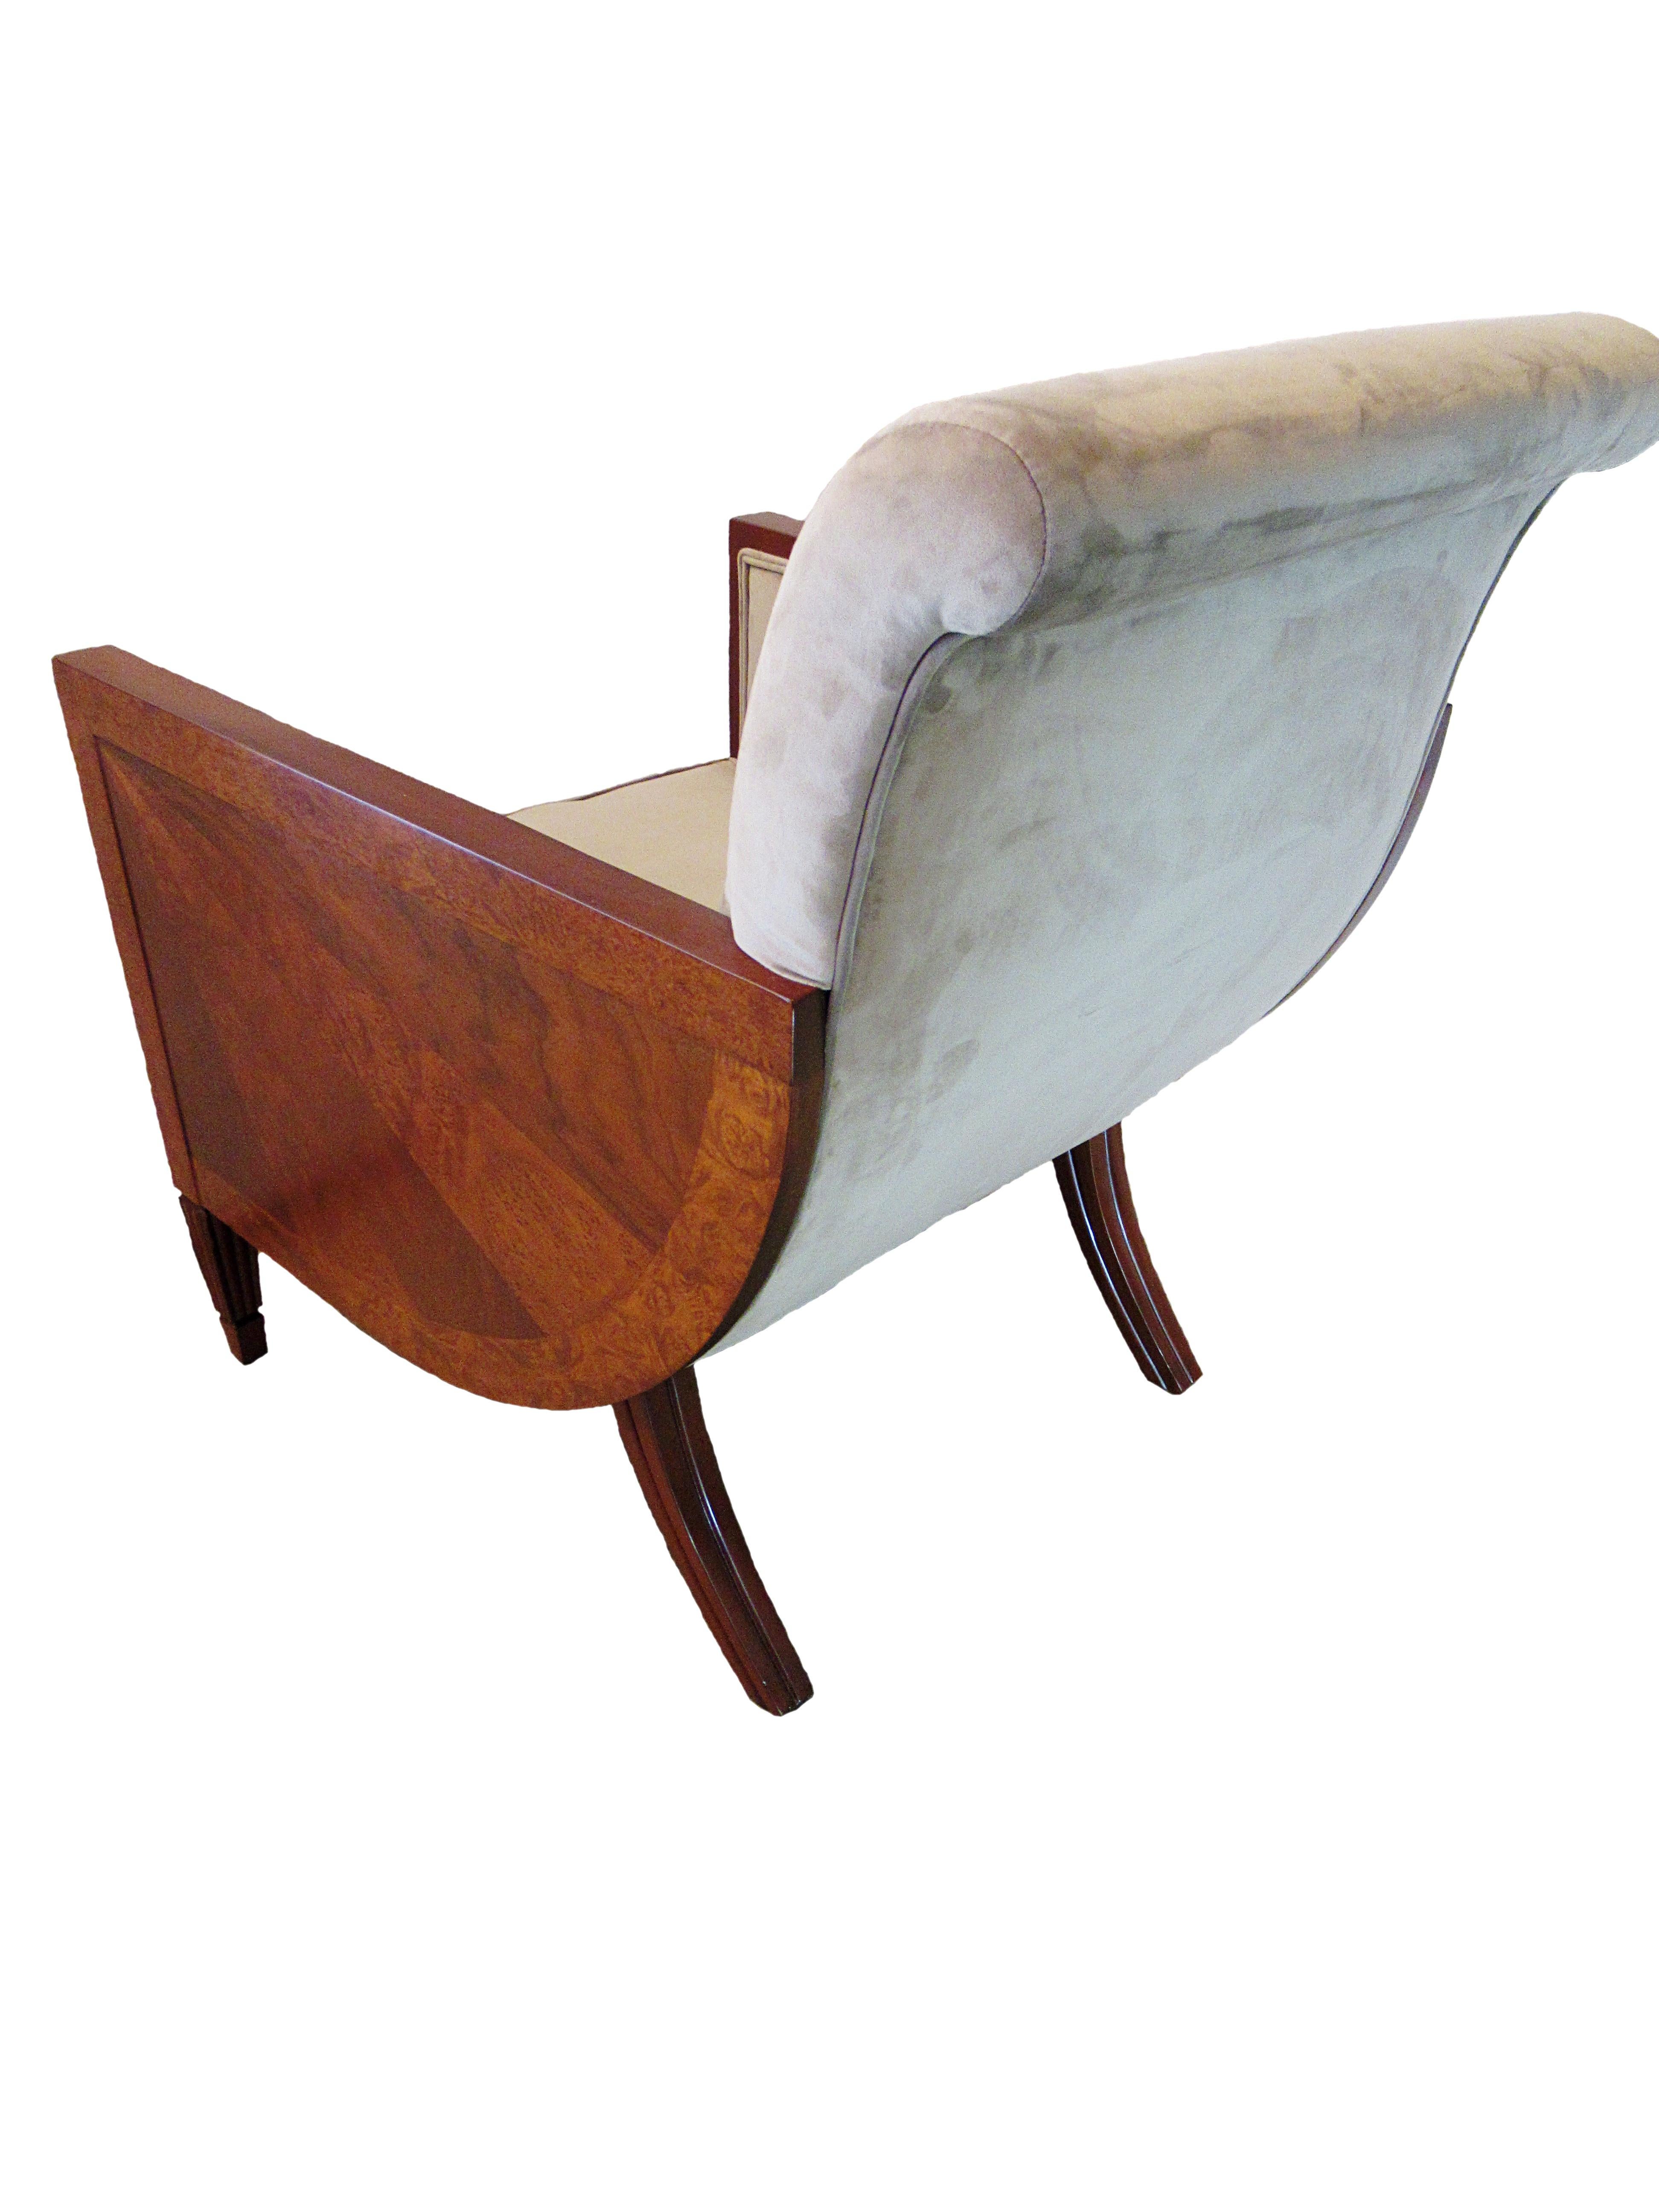 Mid-20th Century French Art Deco Mahogany, Walnut and Rosewood Bergère, Dominique